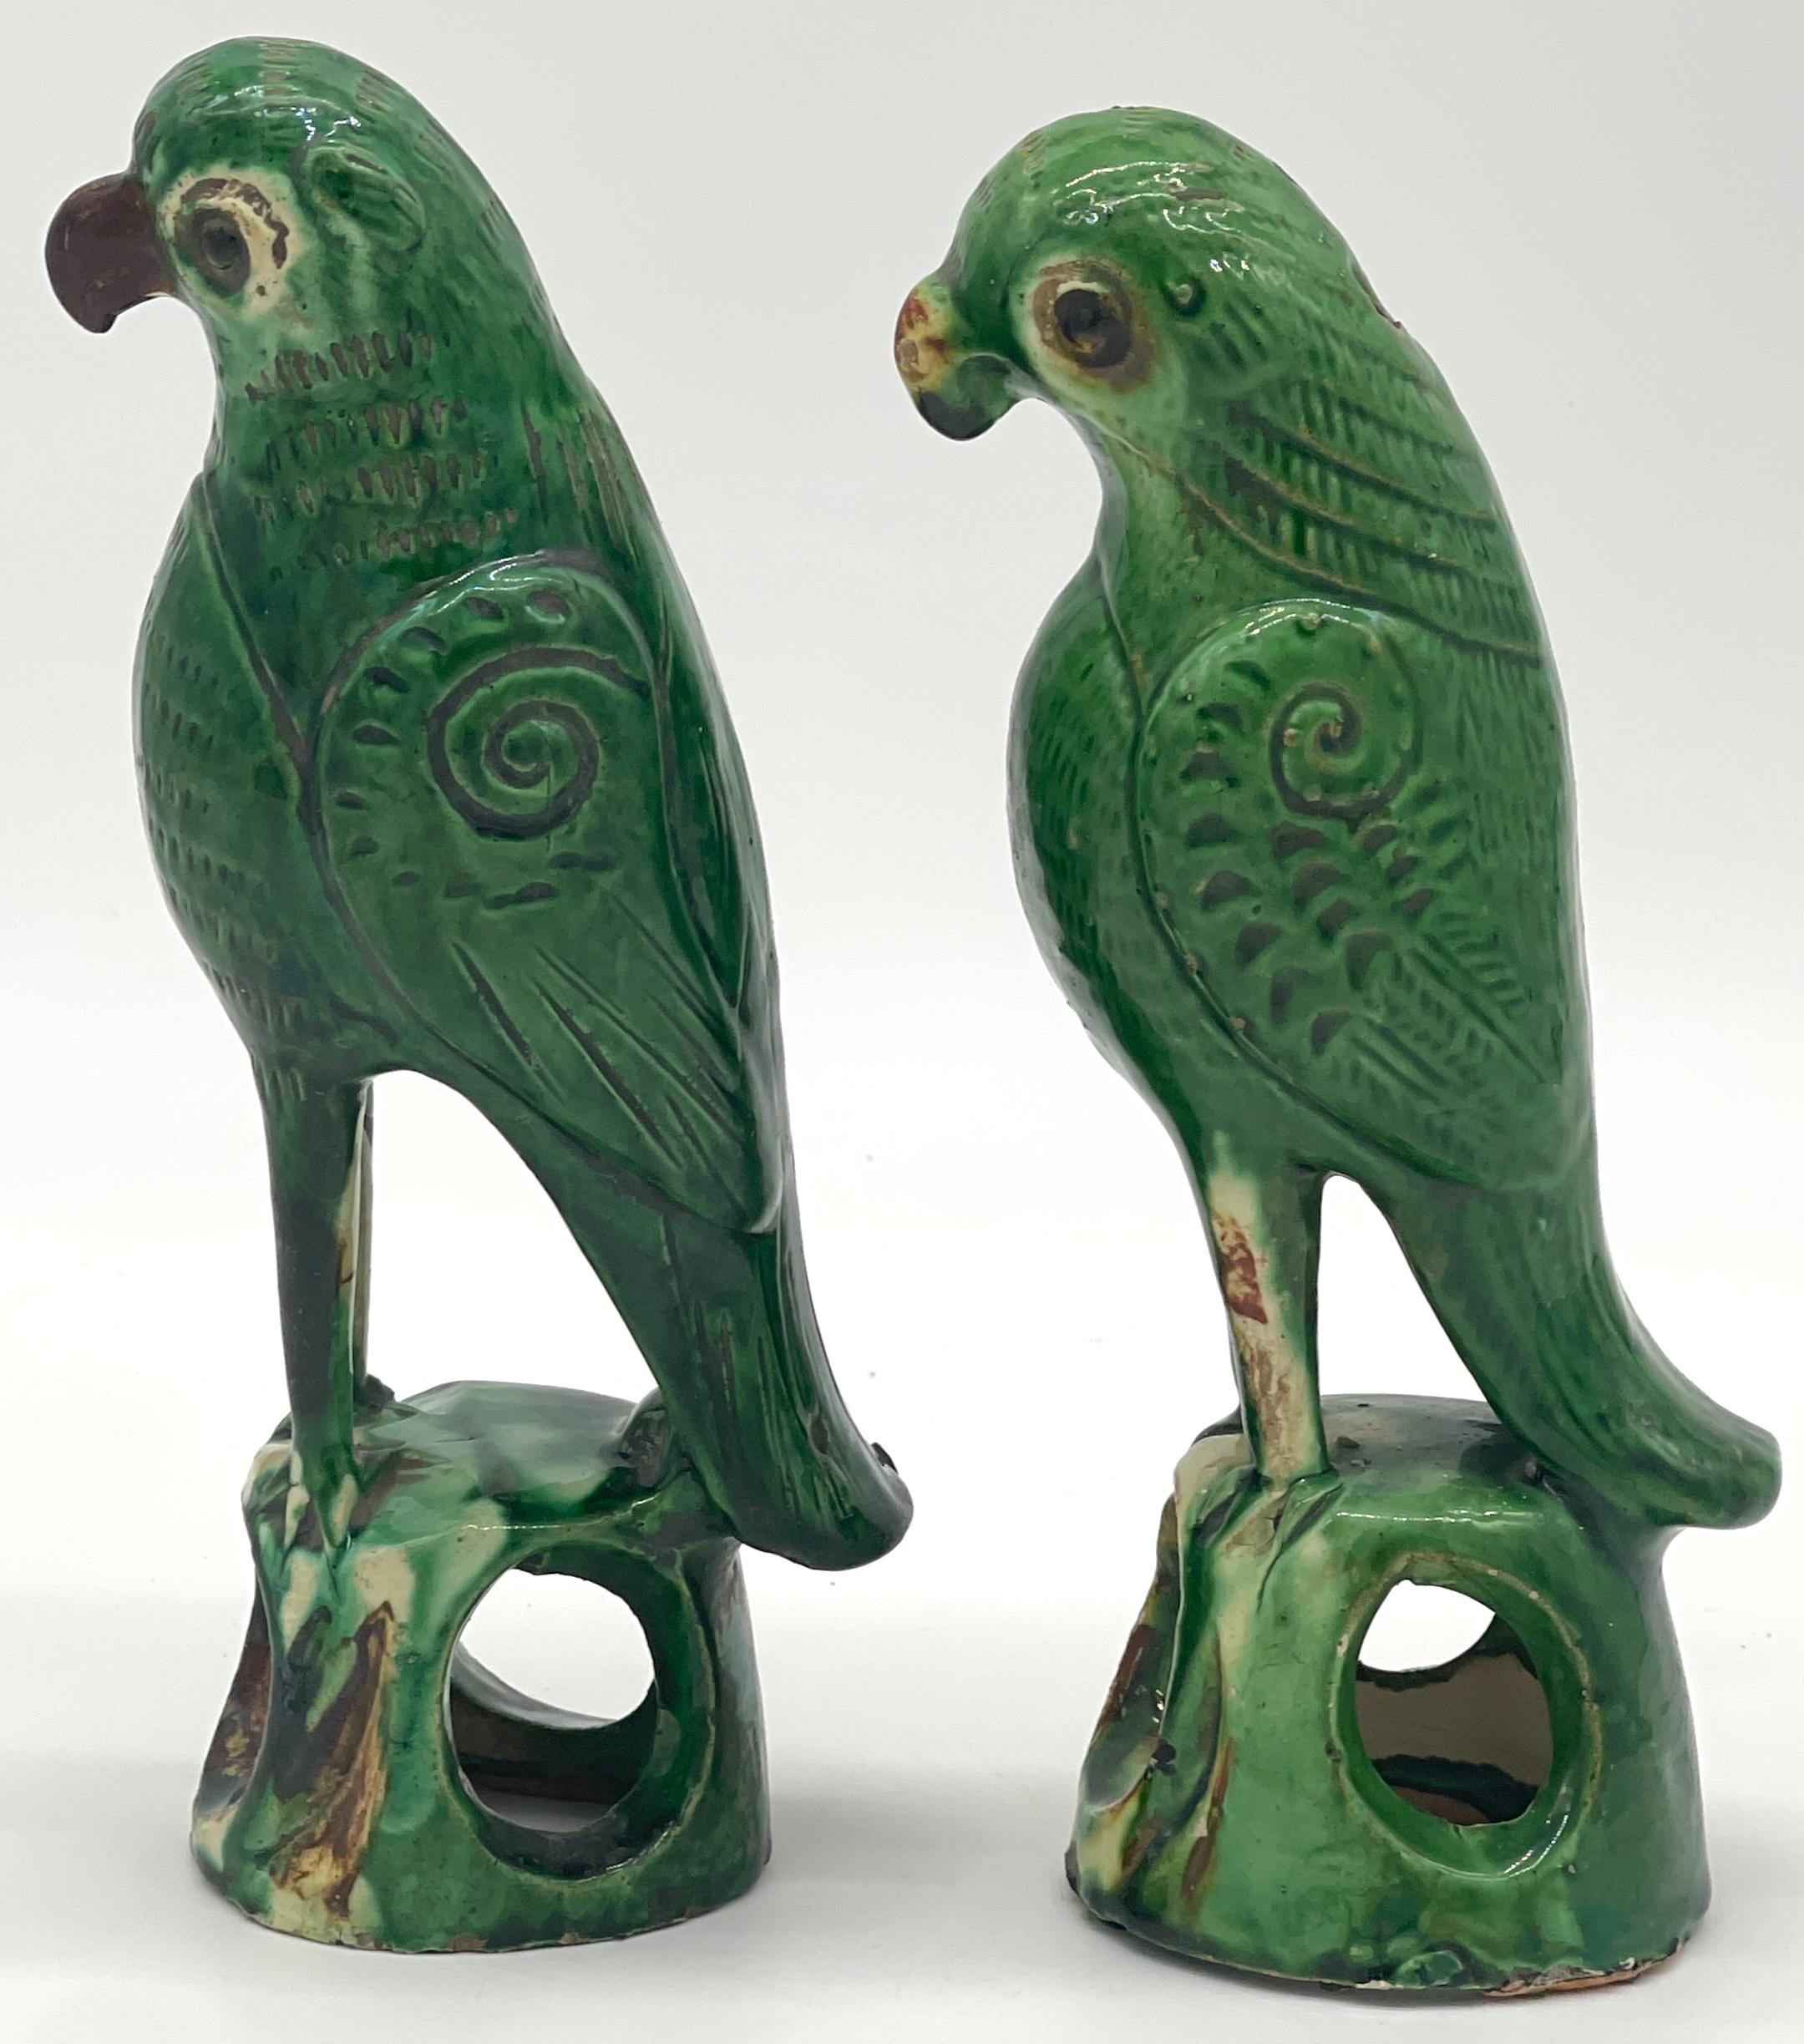 Pair of Chinese Export Porcelain Green Sancai  Glazed Parrots
China, Early 20th Century

A Pair of Chinese Export Porcelain Green Sancai Glazed Parrots, originating from China in the early 20th Century. Each parrot of  typical form, beautifully made